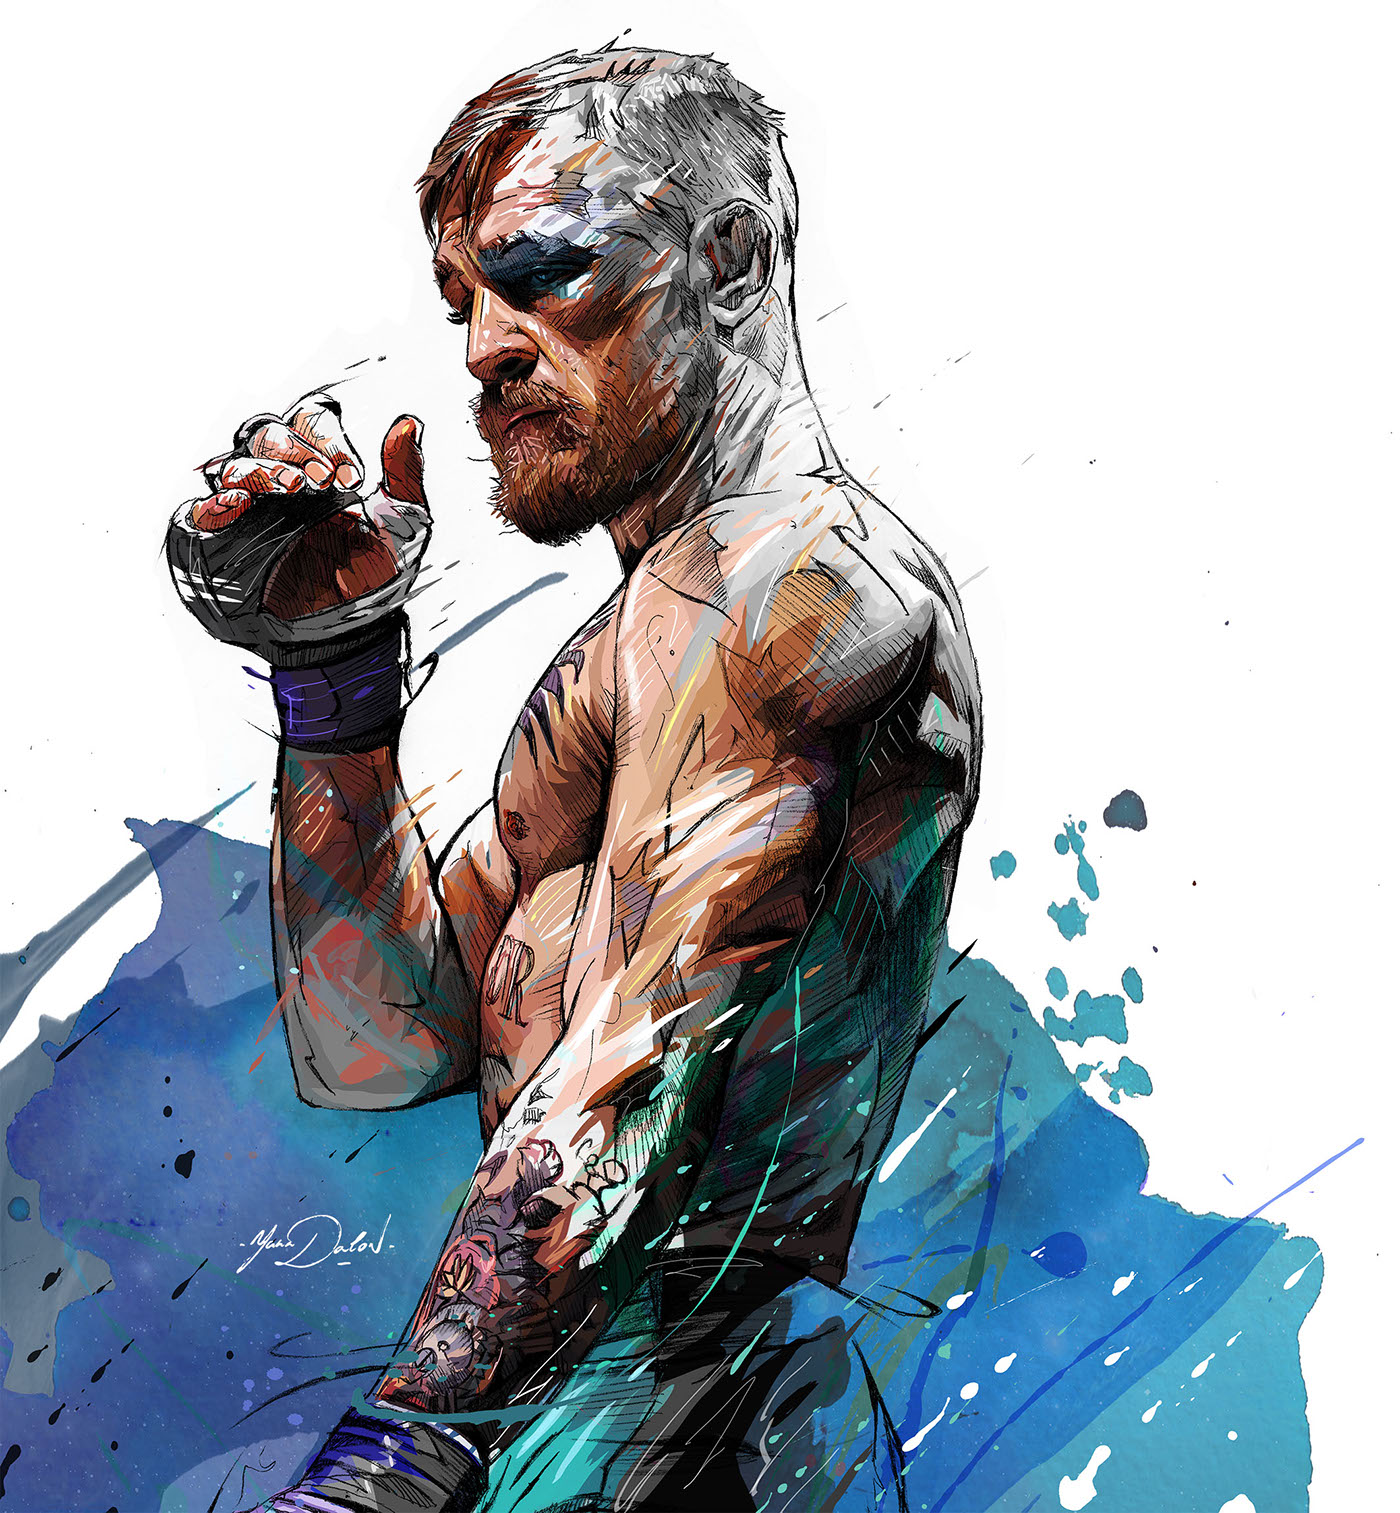 Conor McGregor Floyd Mayweather Rumble Boxing MMA UFC fight Dynamic portrait sport